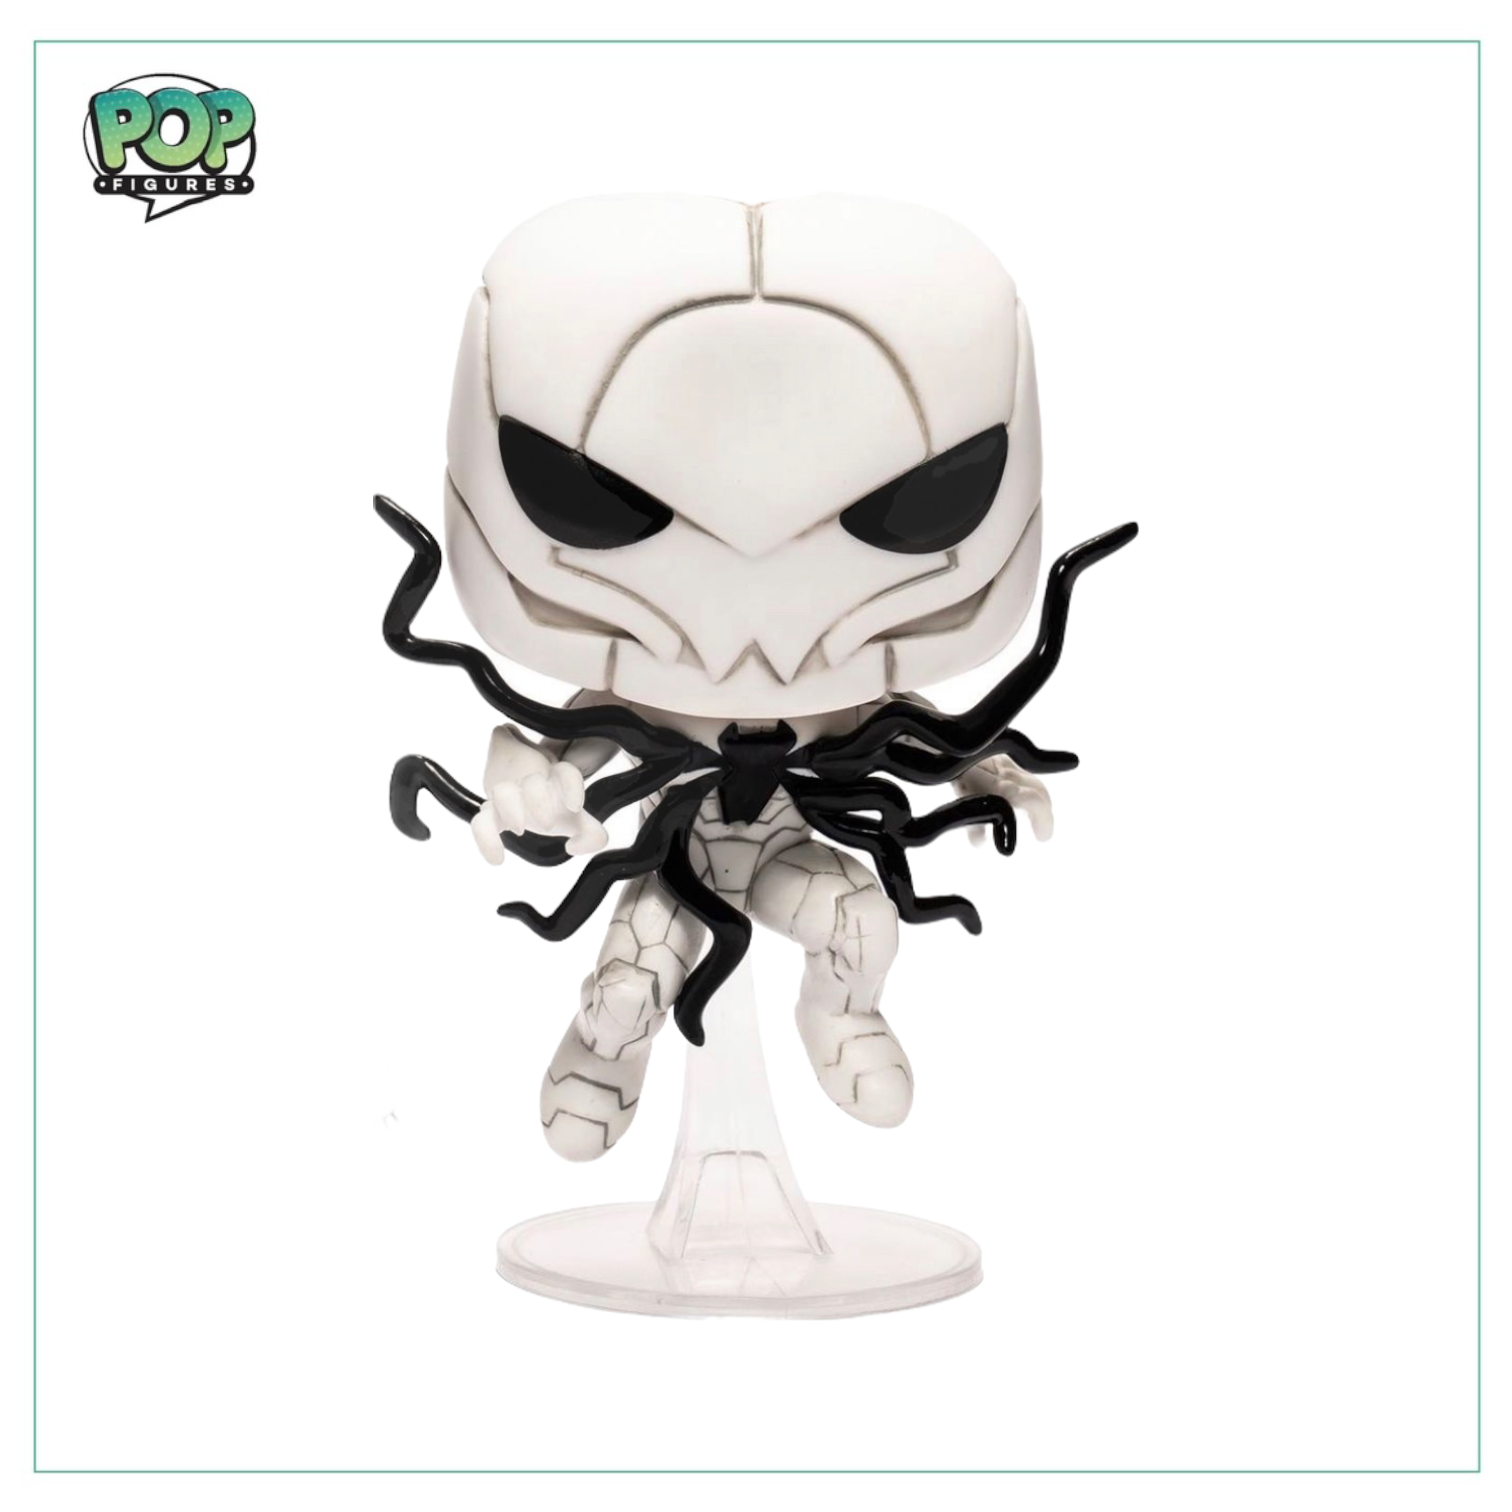 Poison Spider-Man #966 Funko Pop! Marvel - Entertainment Earth Exclusive - Chance Of Glow Chase